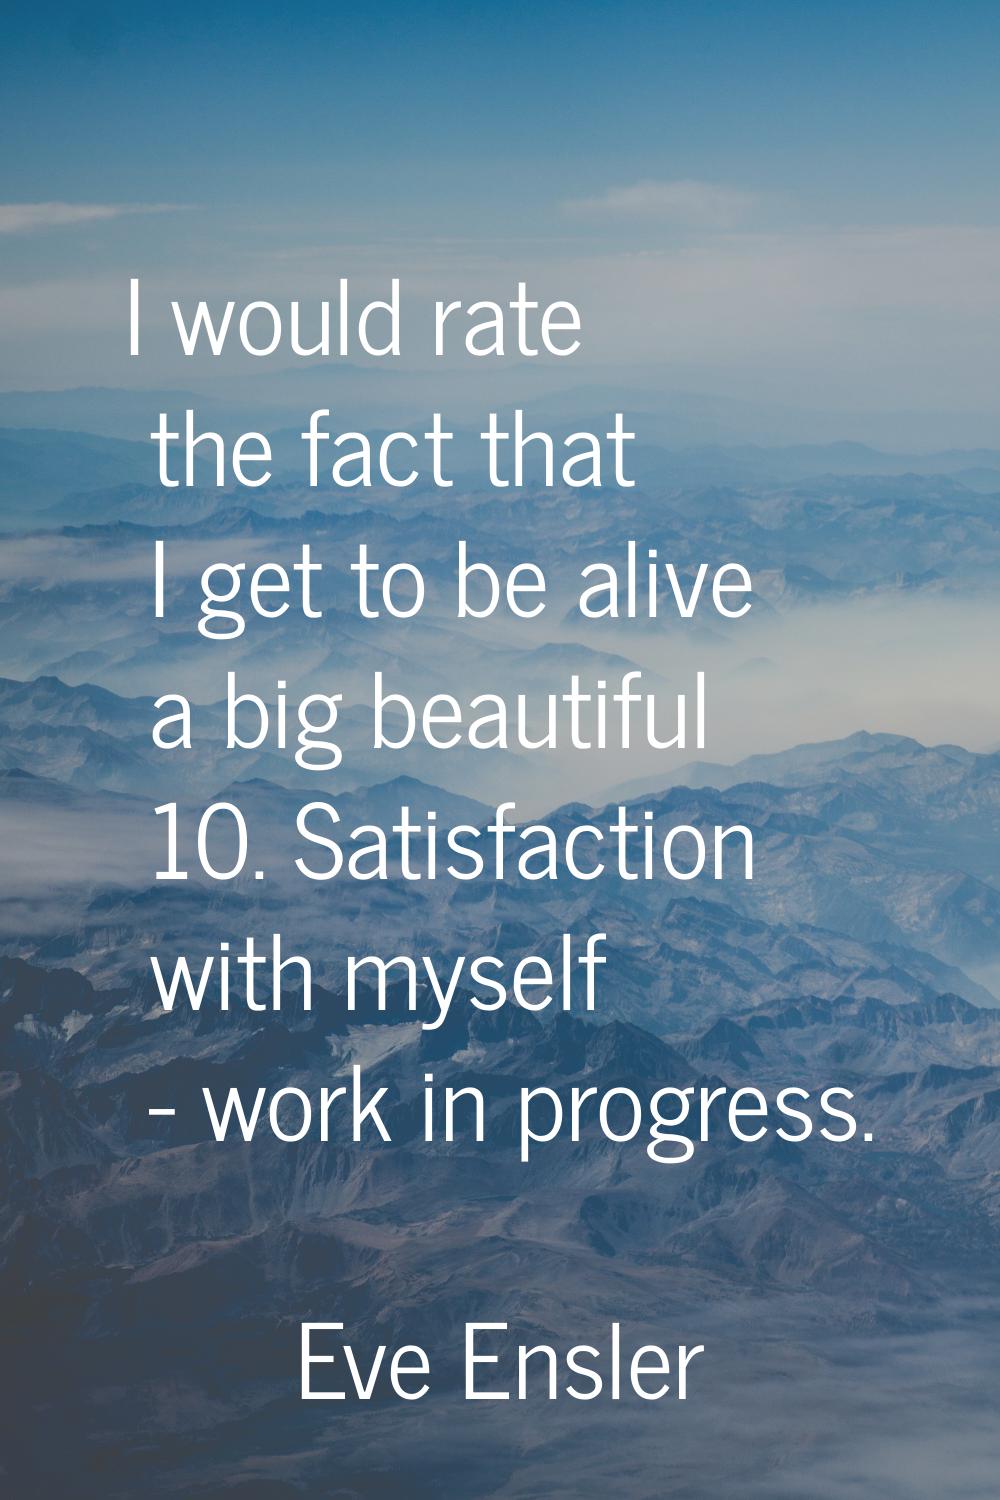 I would rate the fact that I get to be alive a big beautiful 10. Satisfaction with myself - work in